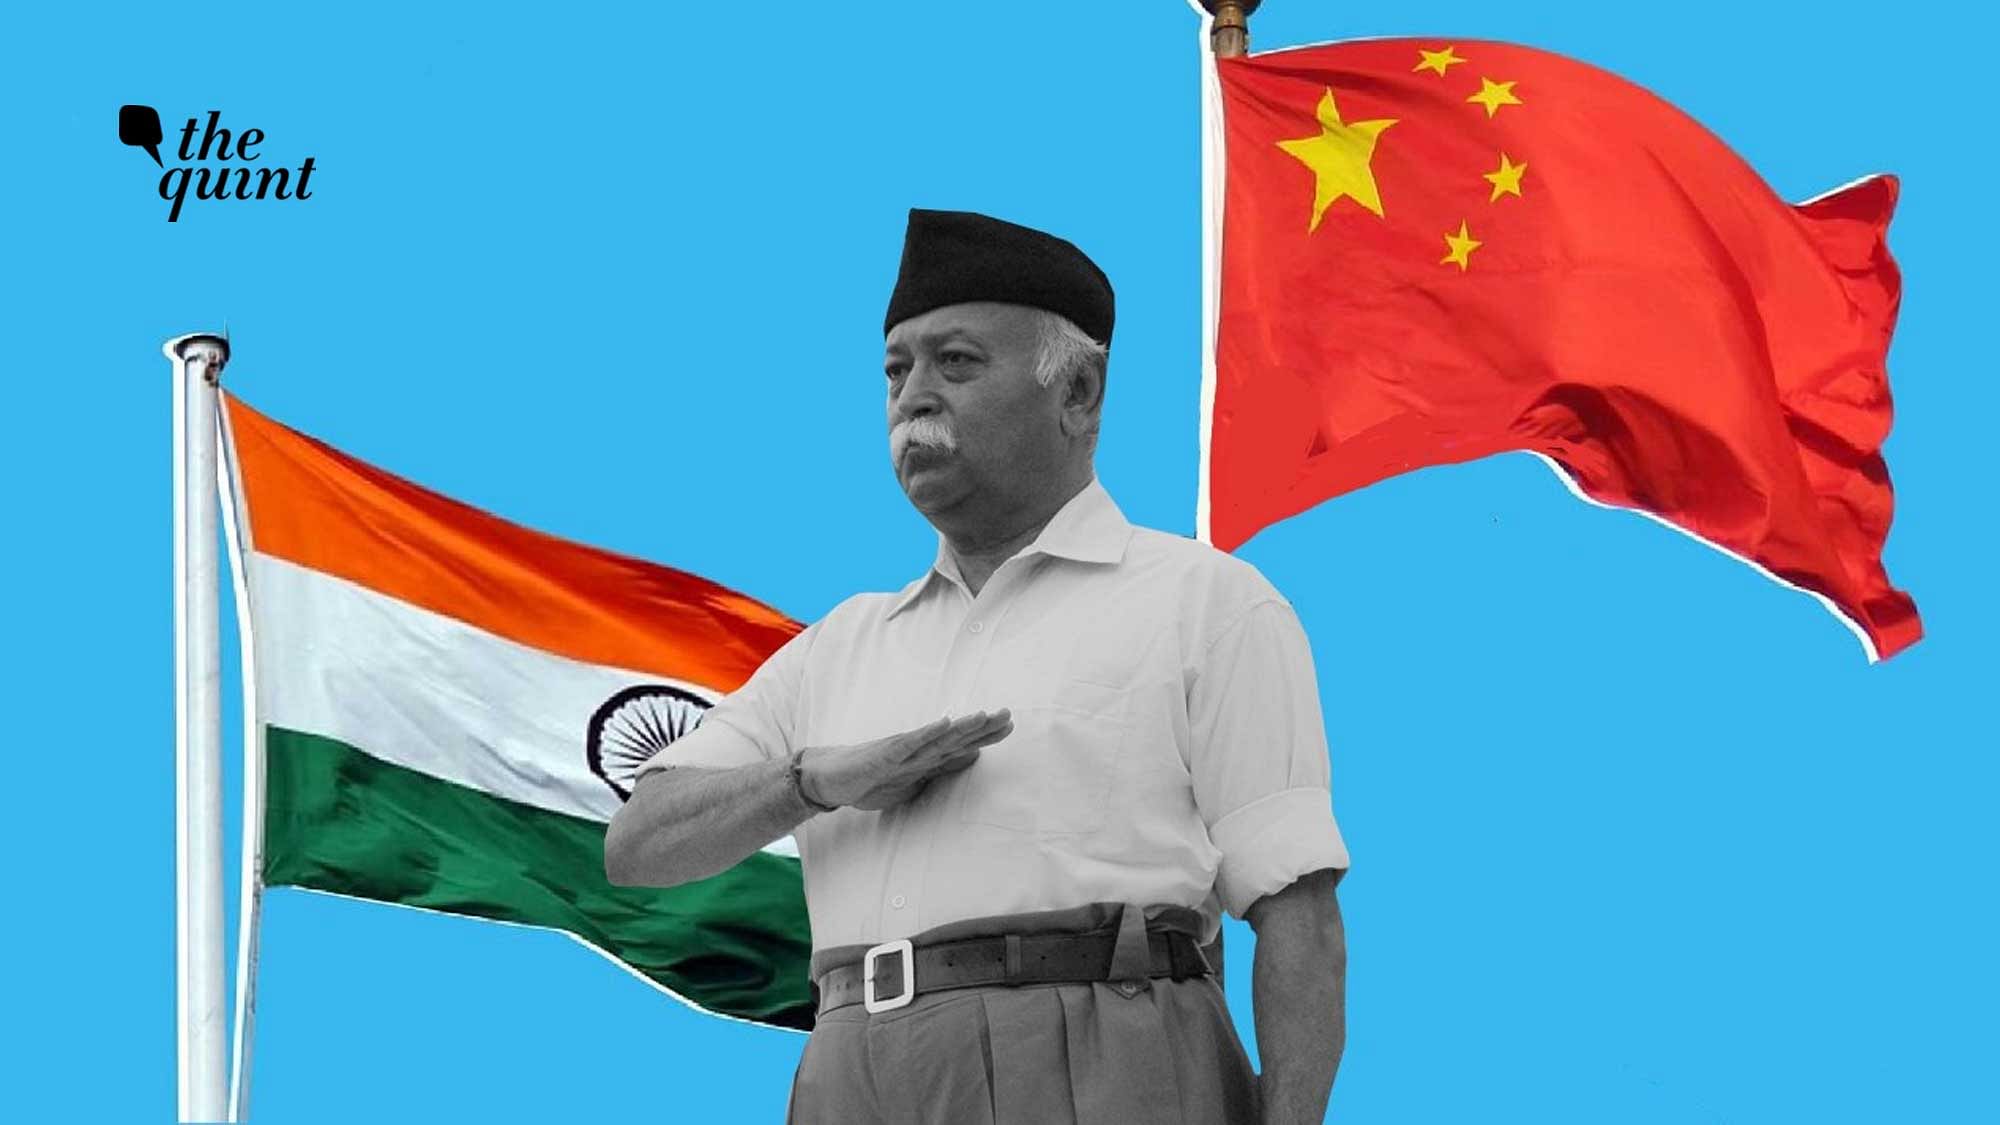 Image of RSS Chief Mohan Bhagwat – and India &amp; China flags – used for representational purposes.